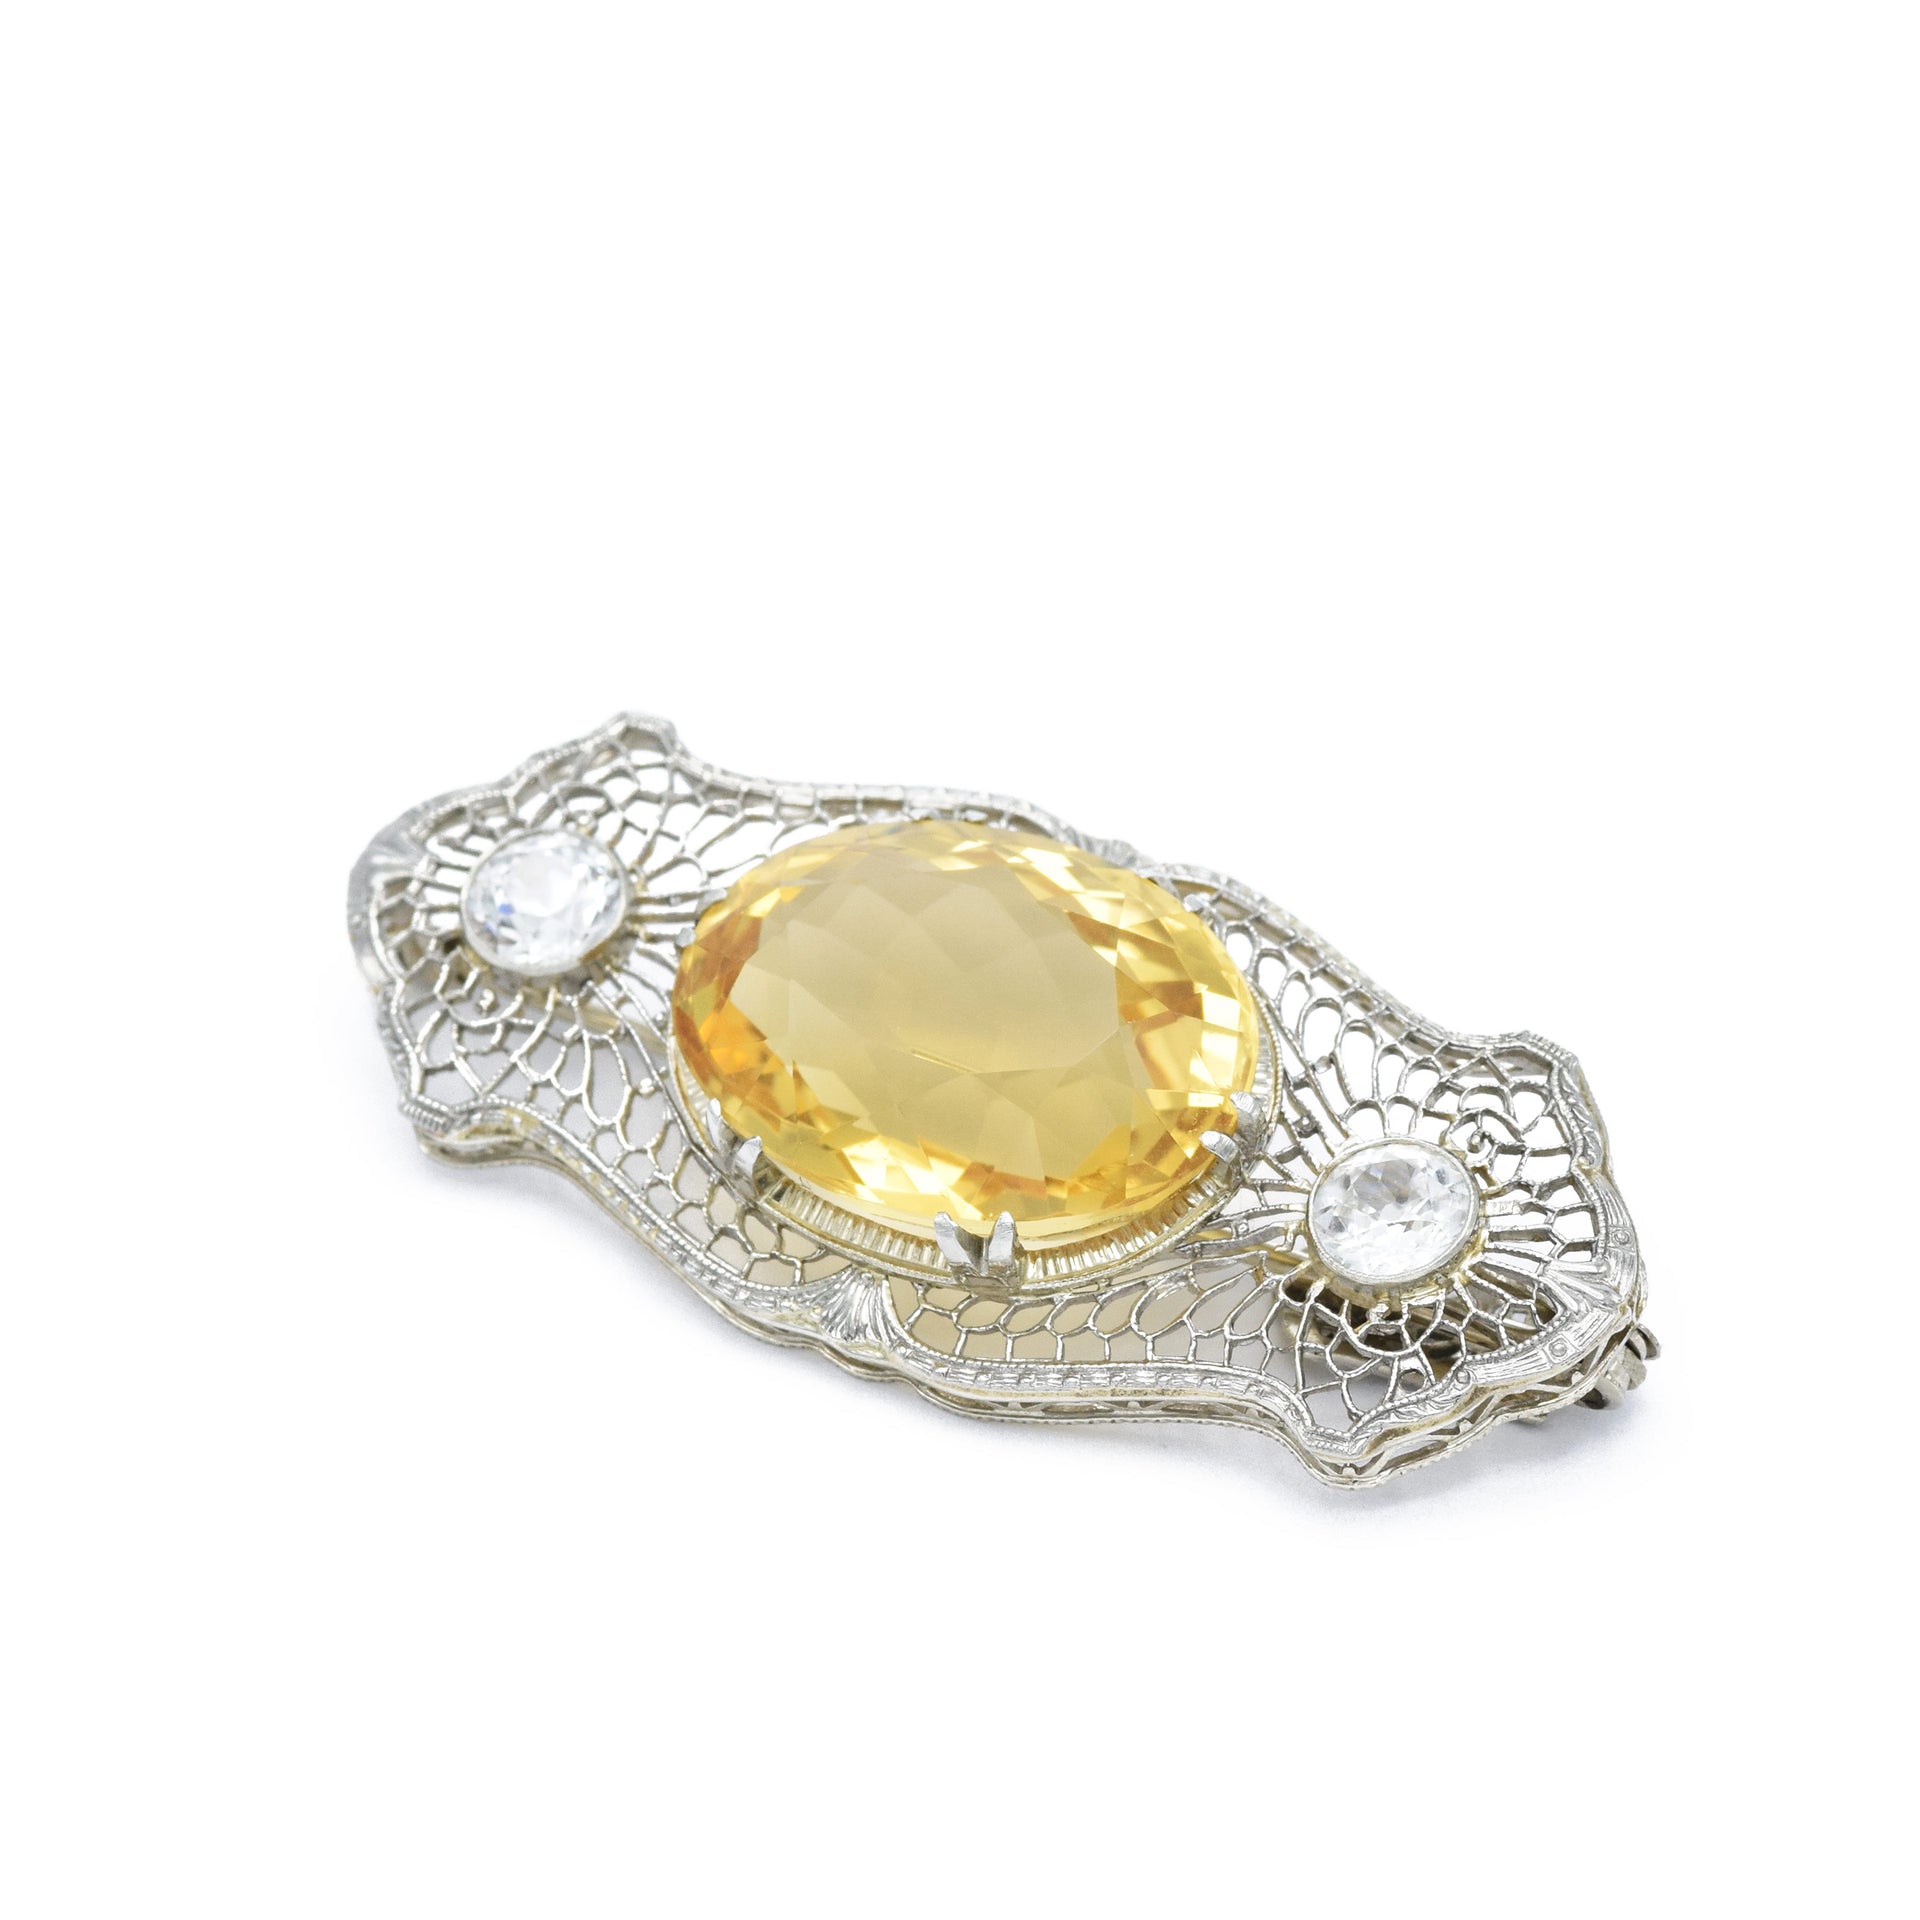 Art Nouveau, Gold Filigree with Citrine and Sapphires